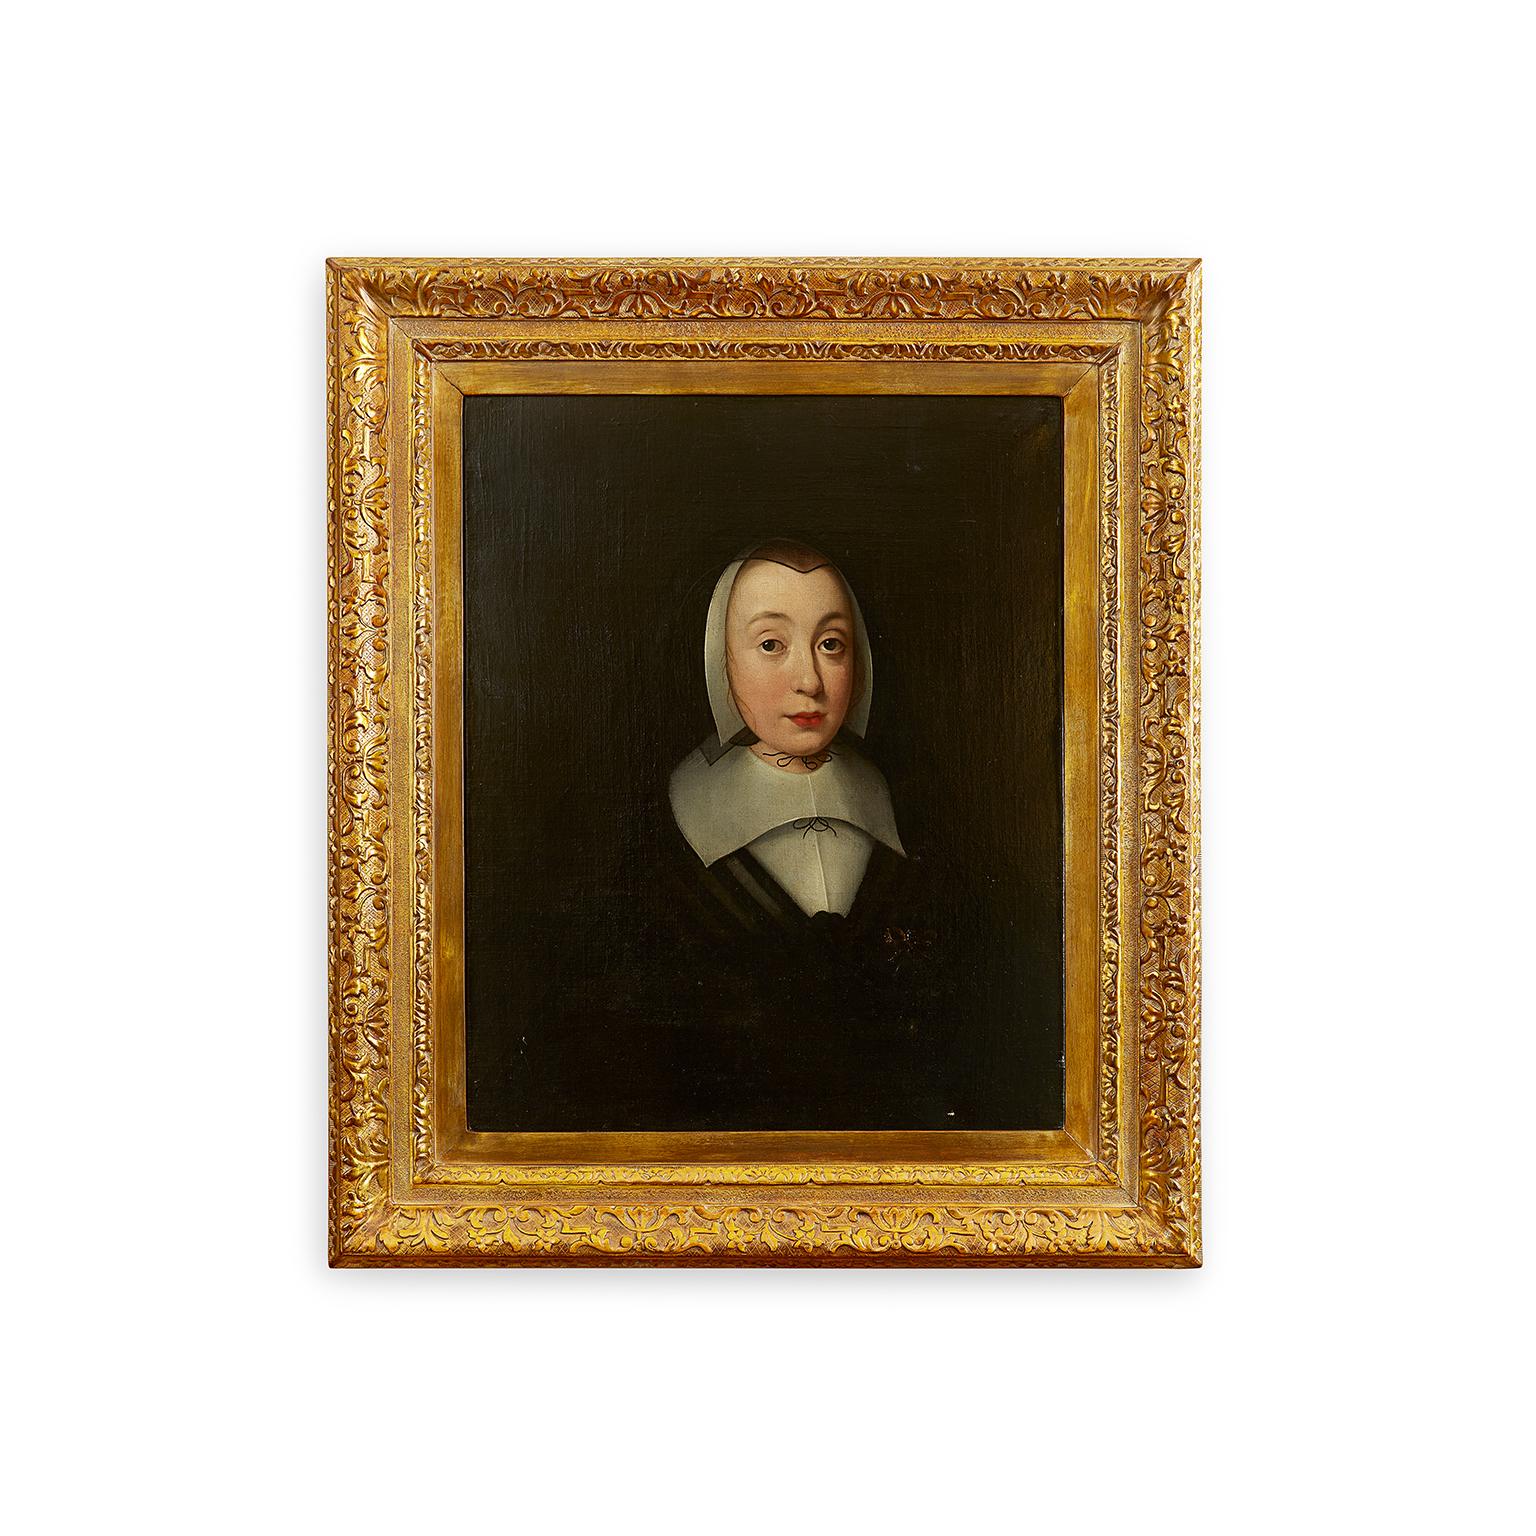 Italian 17th Century English Portrait of Lady Jane Bromley as Young Widow 1640 circa